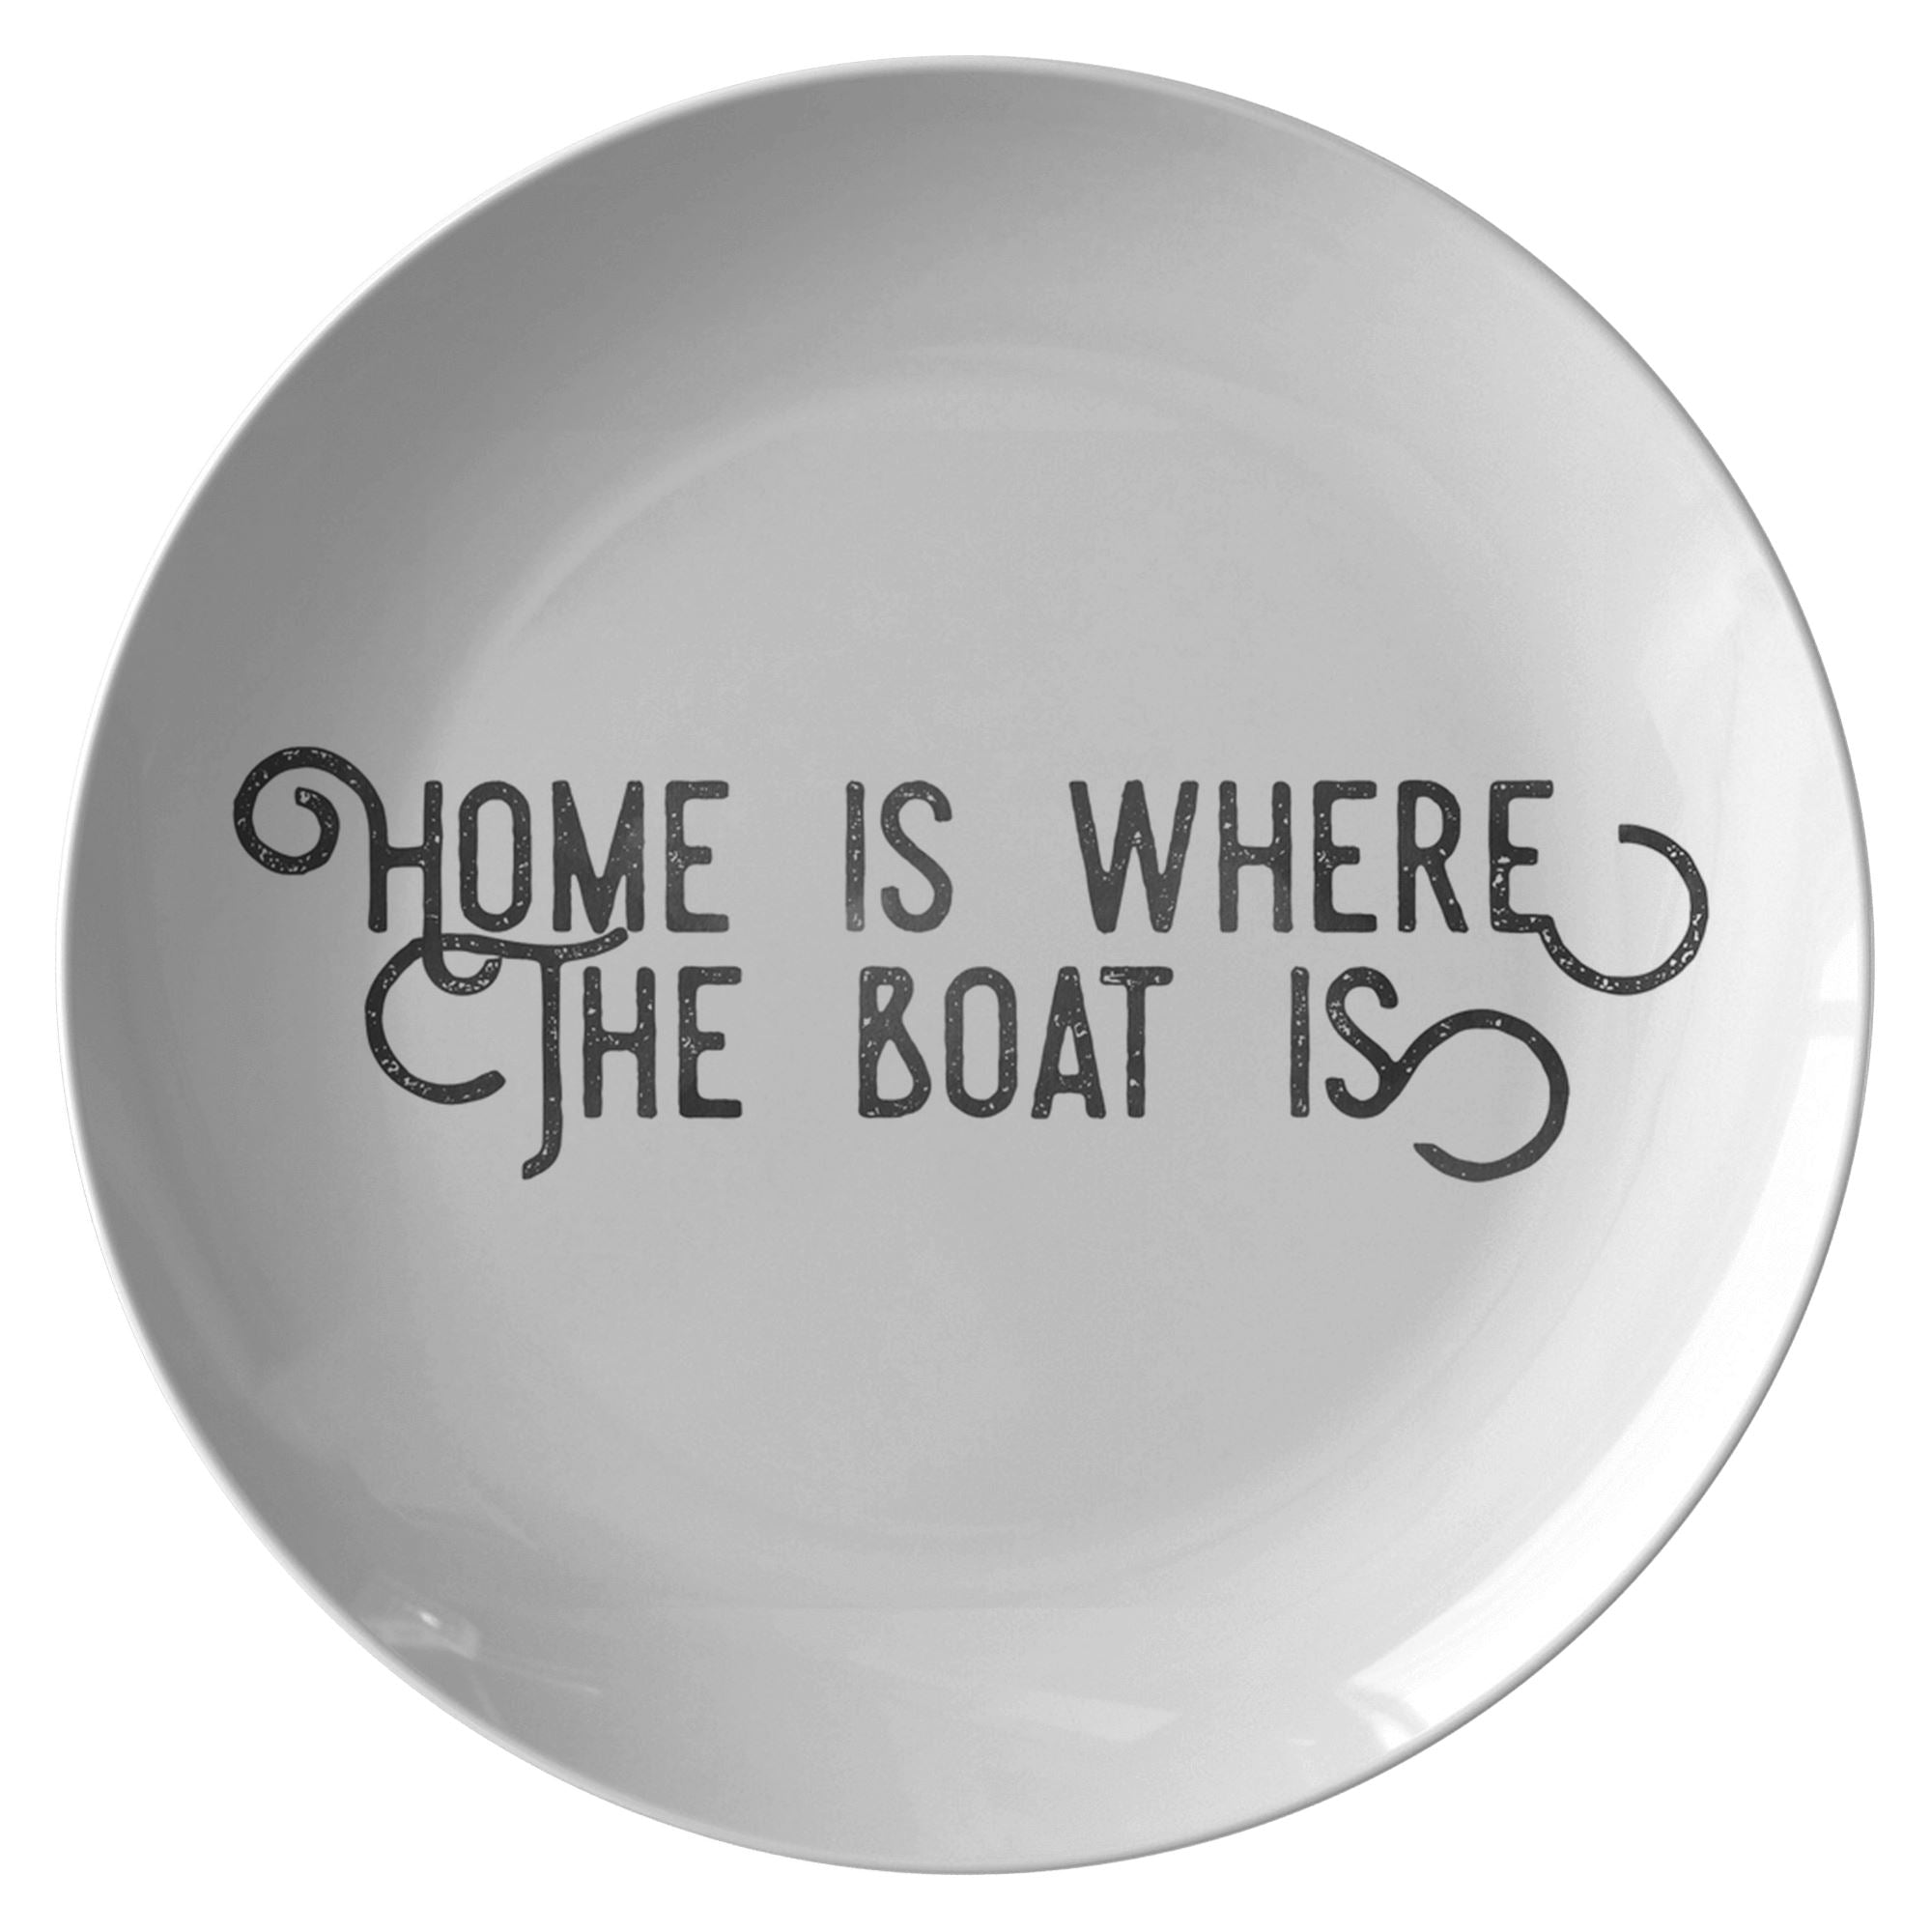 Home Is Where The Boat Is Plate - Houseboat Kings